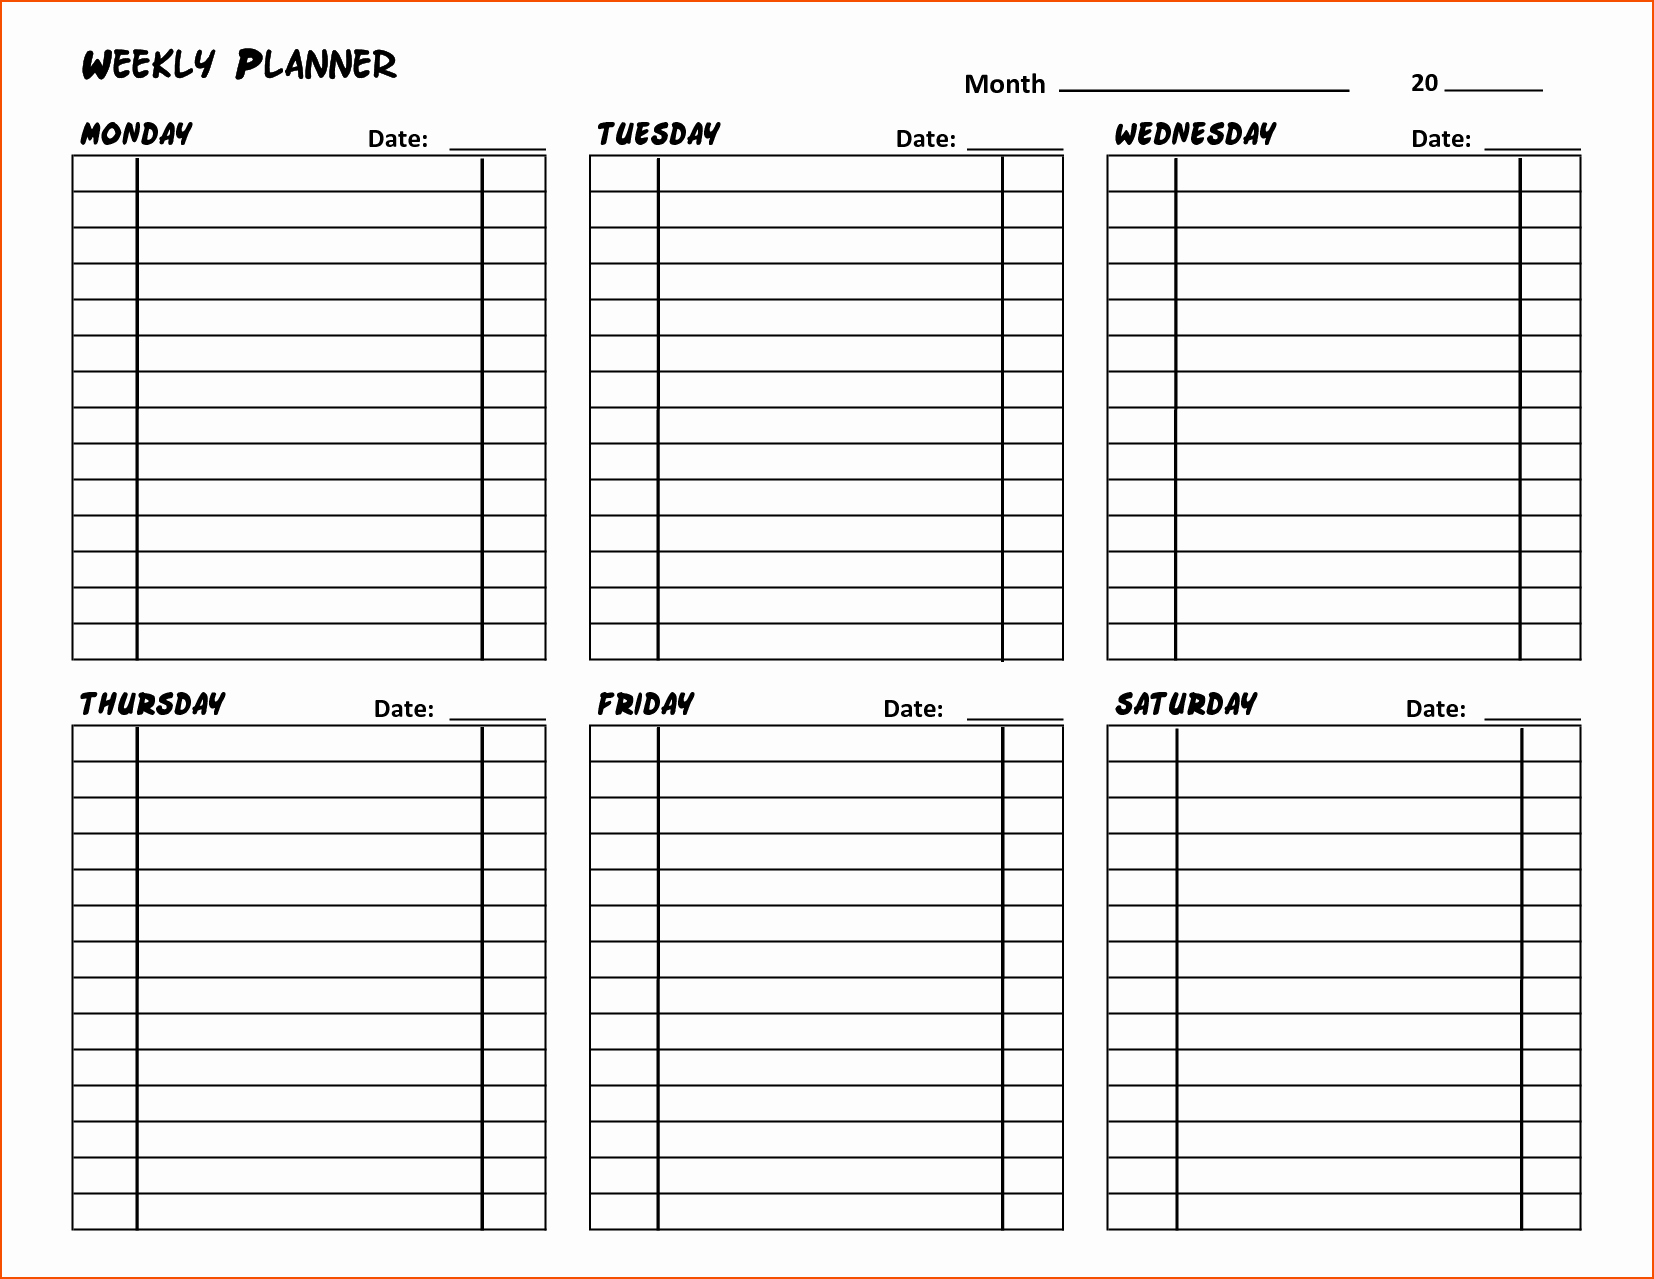 Weekly Monthly Planner Template New 5 Weekly Planner Templates Bookletemplate